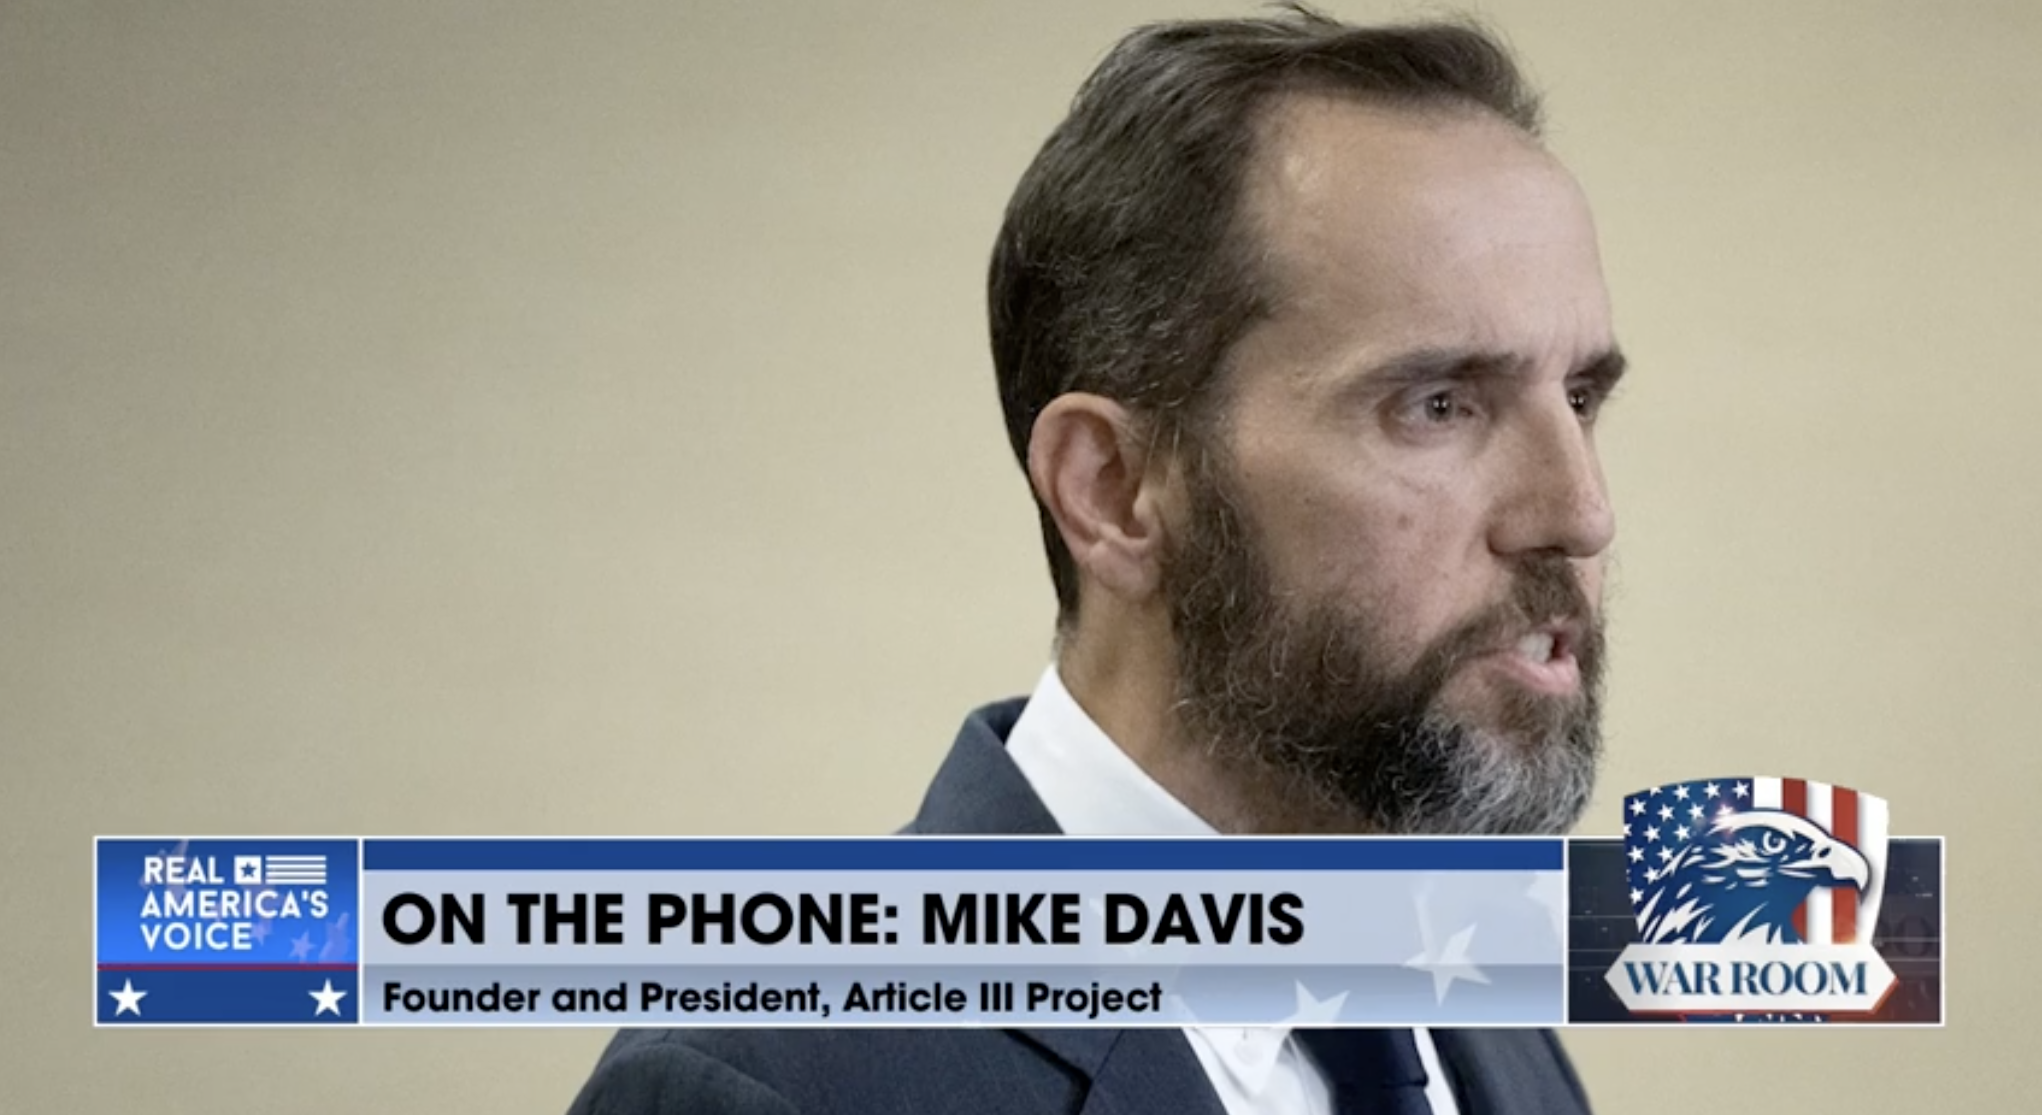 VIDEO: Mike Davis - "This Is So Much Bigger Than Donald Trump"